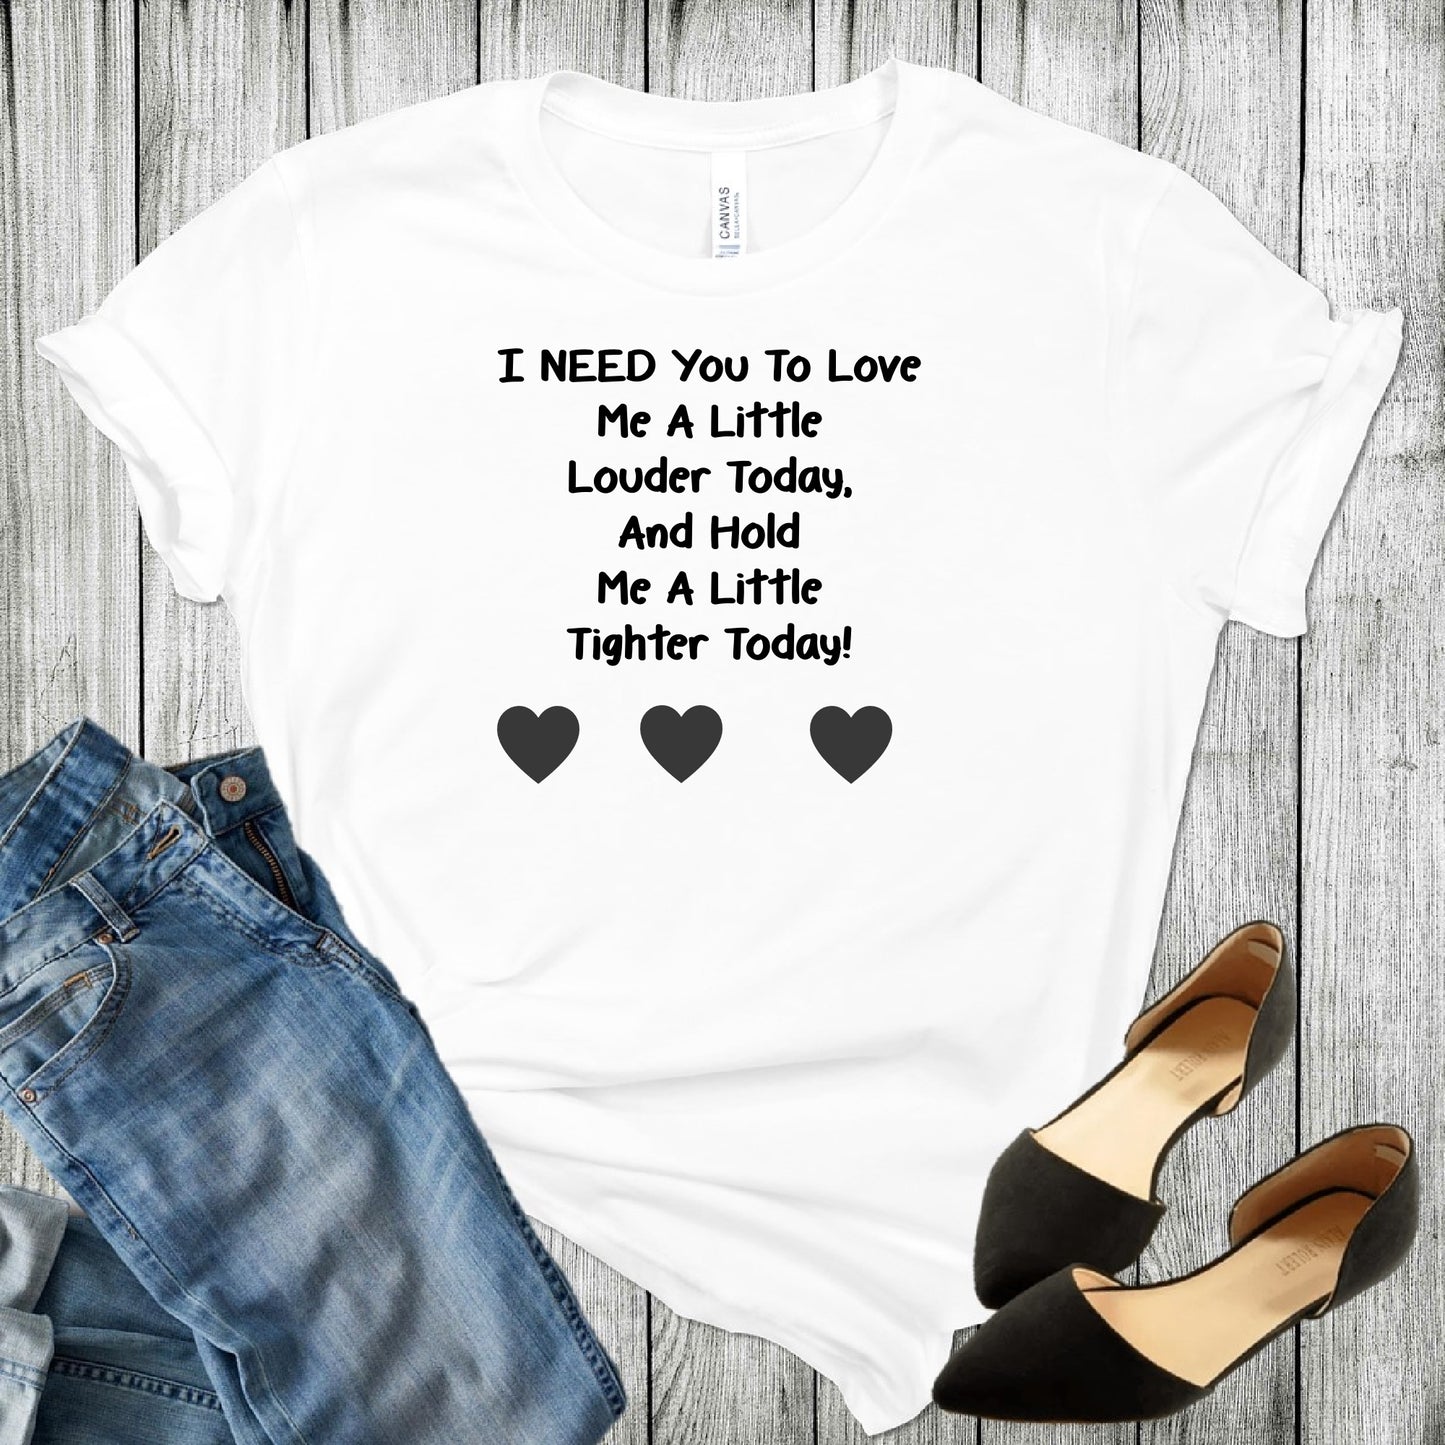 Grit City Rebel White TShirt with Black writting I Need You To Love Me A Little Louder Today, And Hold Me A Little Tighter Today! in unisex sizing small to 3X